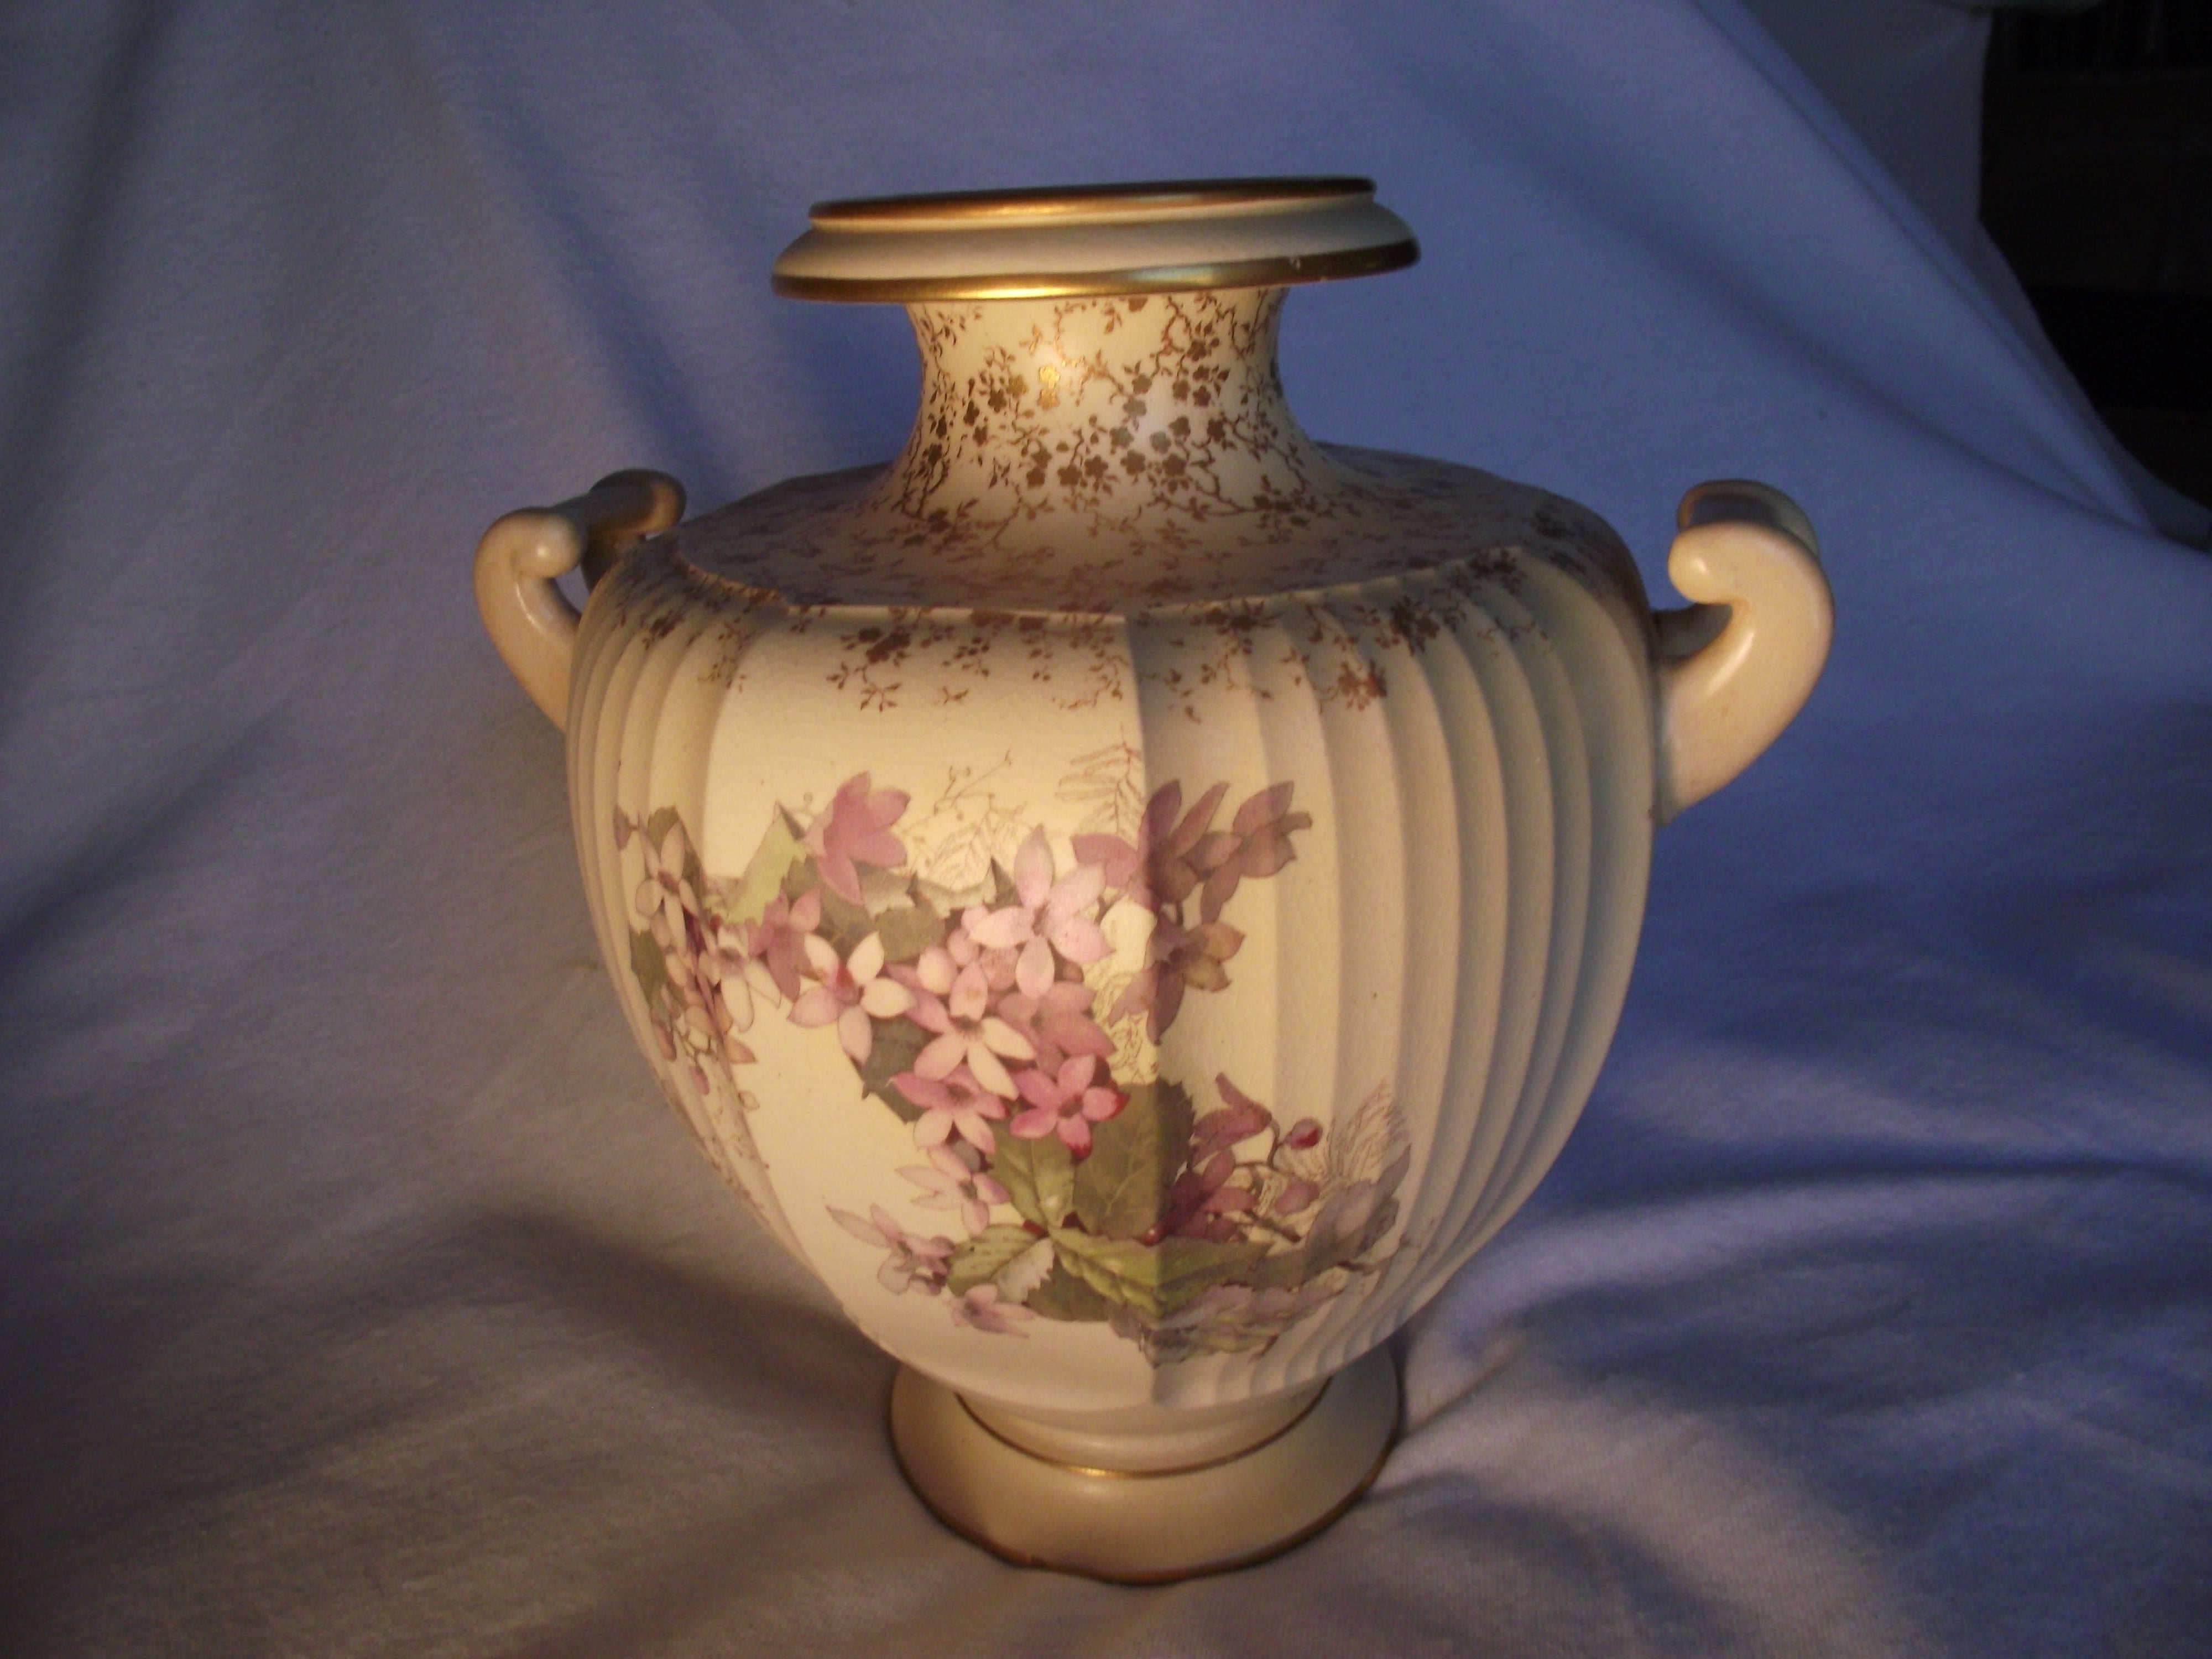 Charming warm colored vase with a hand-painted lilac and leaf pattern. The top and bottom have gold accents. No chips or cracks but there is age crackling in the glaze.

Sir Henry Doulton established and art studio in Burslem, Stoke-on-trent in